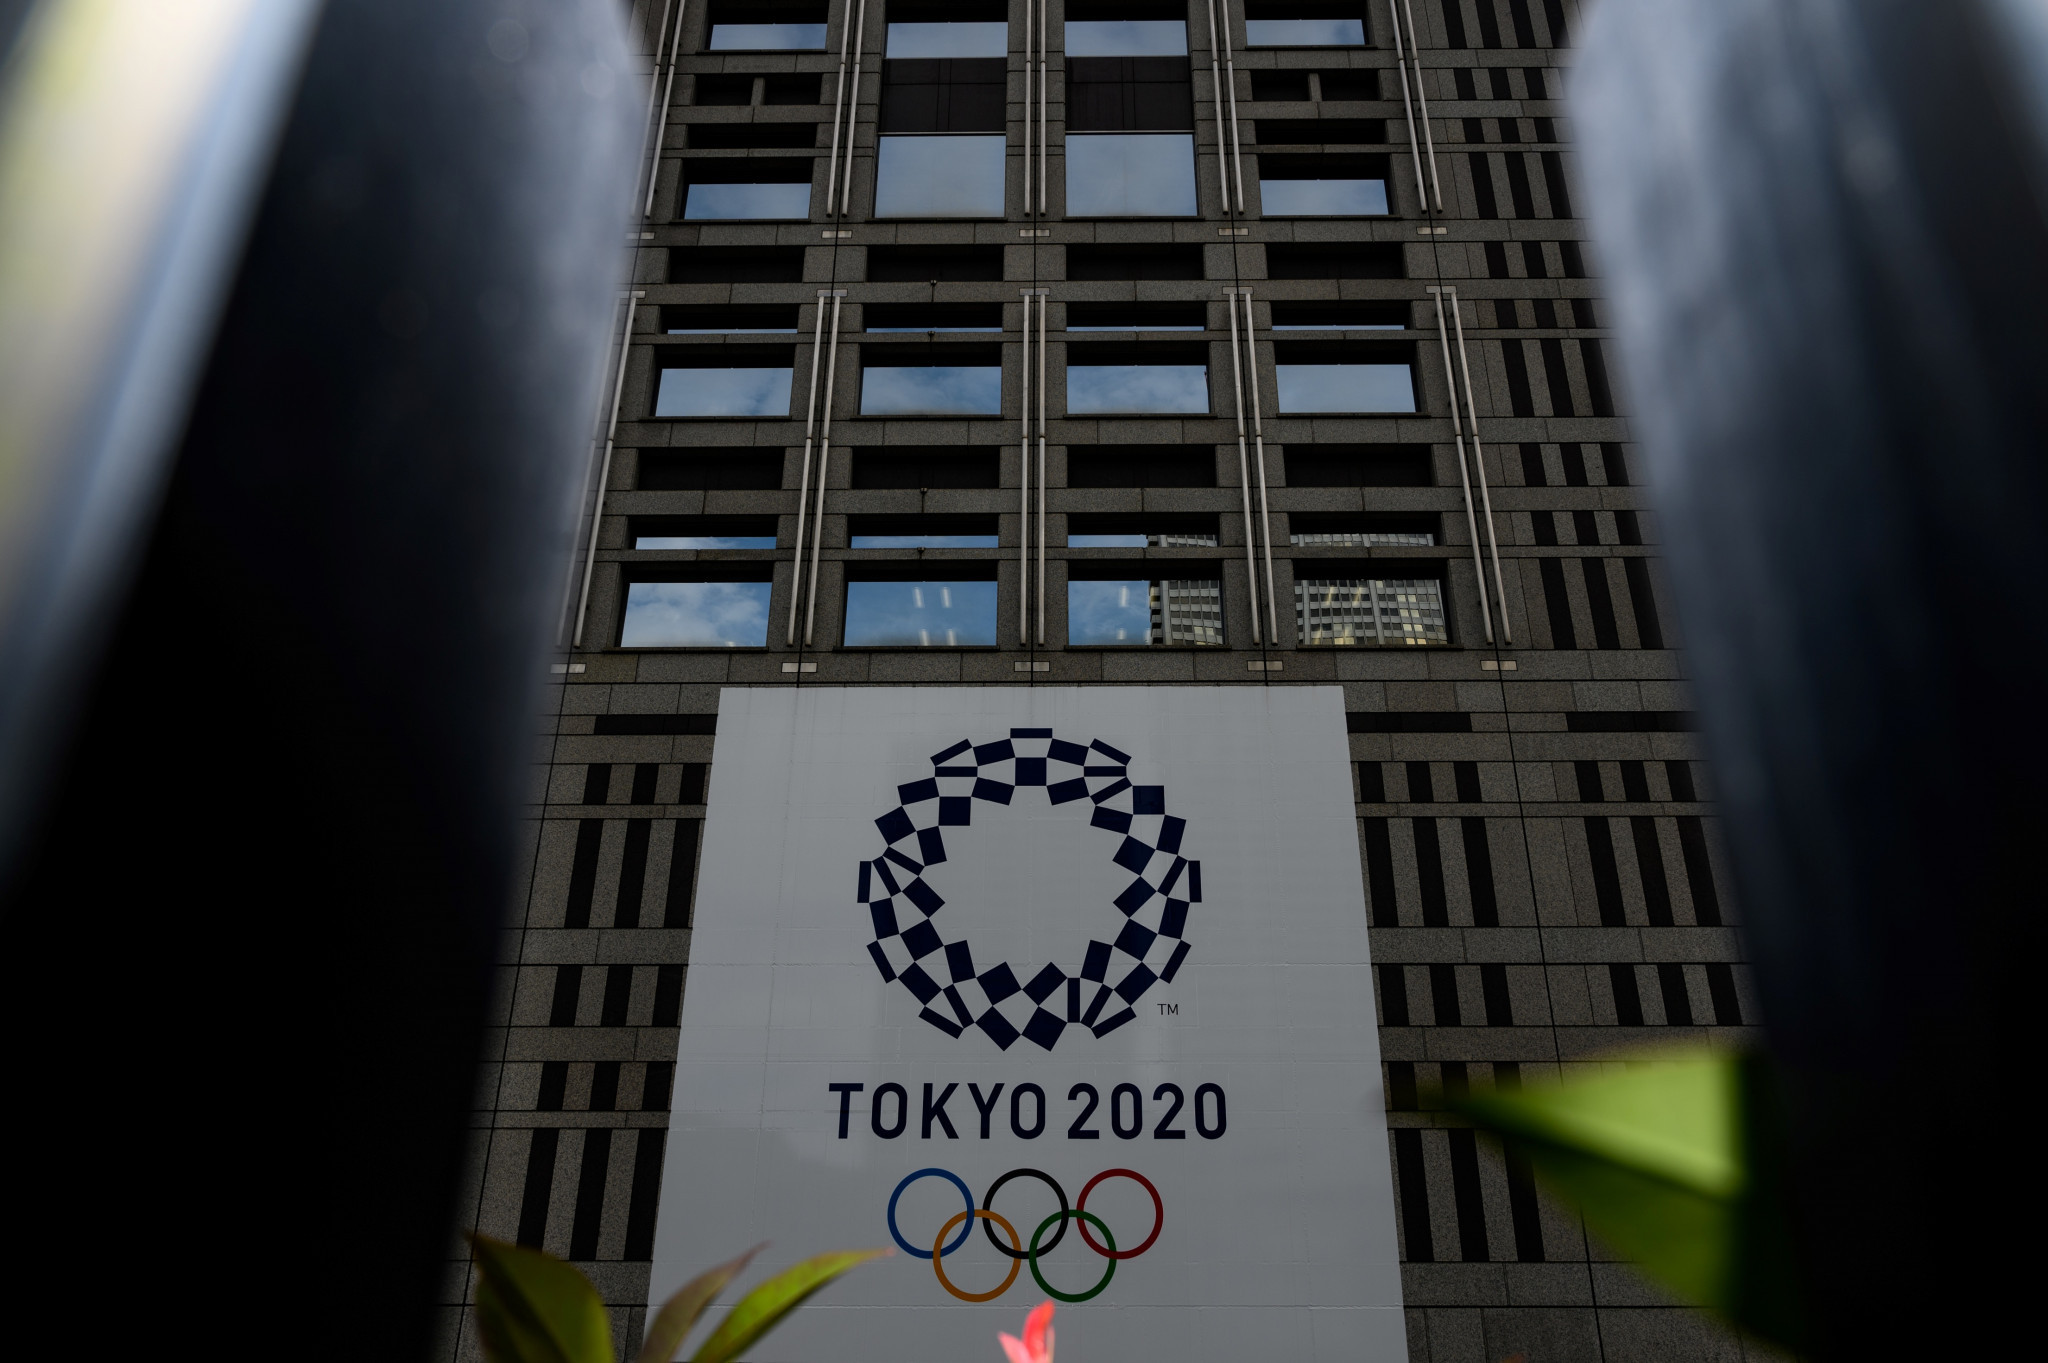 A fifth member of staff at the Organising Committee of the Tokyo 2020 Olympic and Paralympic Games has tested positive for COVID-19 ©Getty Images